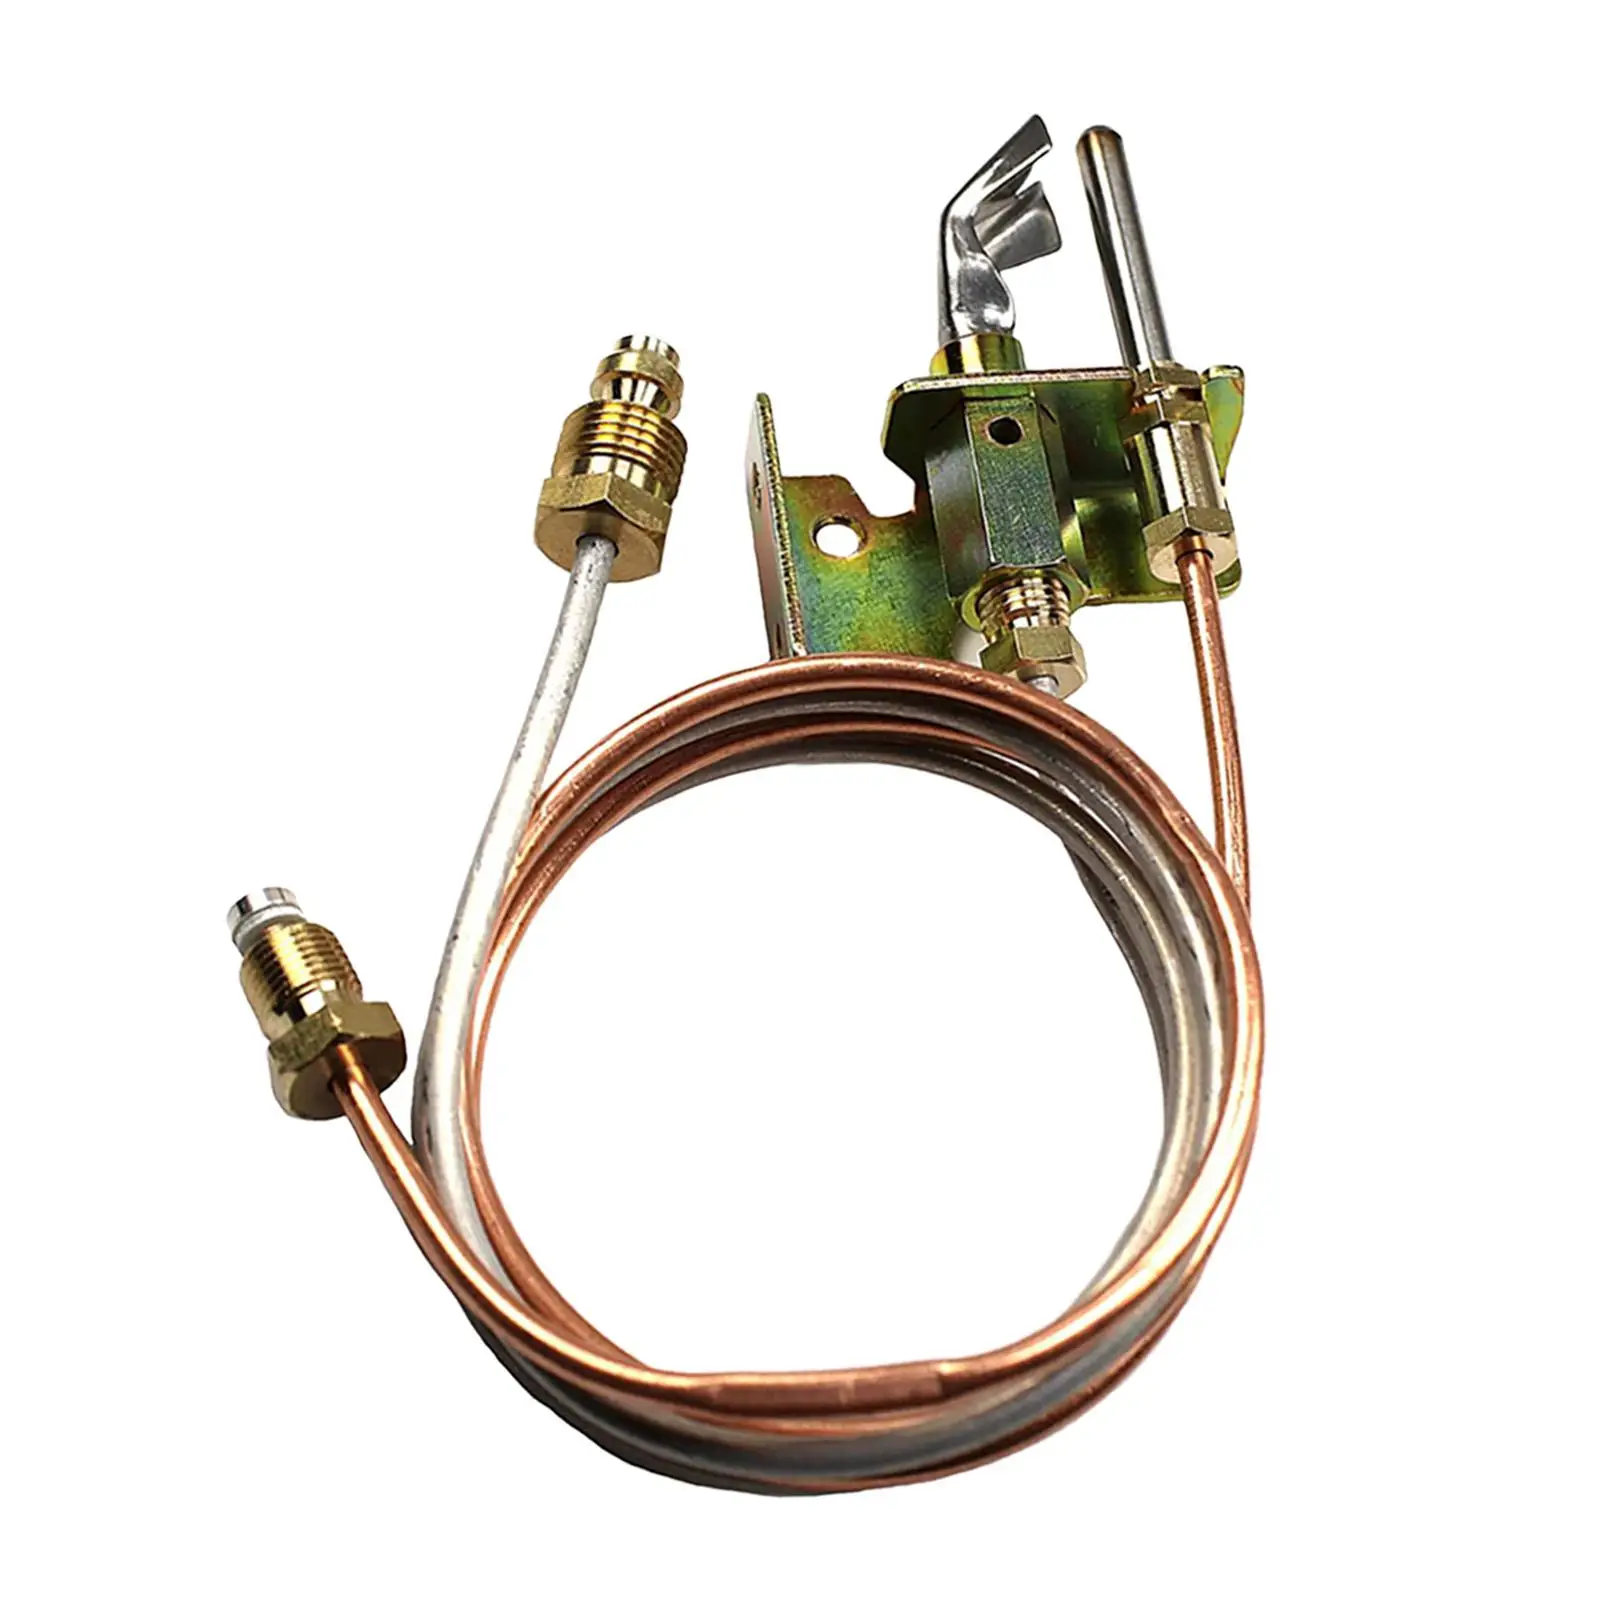 Heater Pilots Assembly Heater Thermopile Pilots Thermocouple And Tubing Water Heater Pilots Assembely Replacement Parts